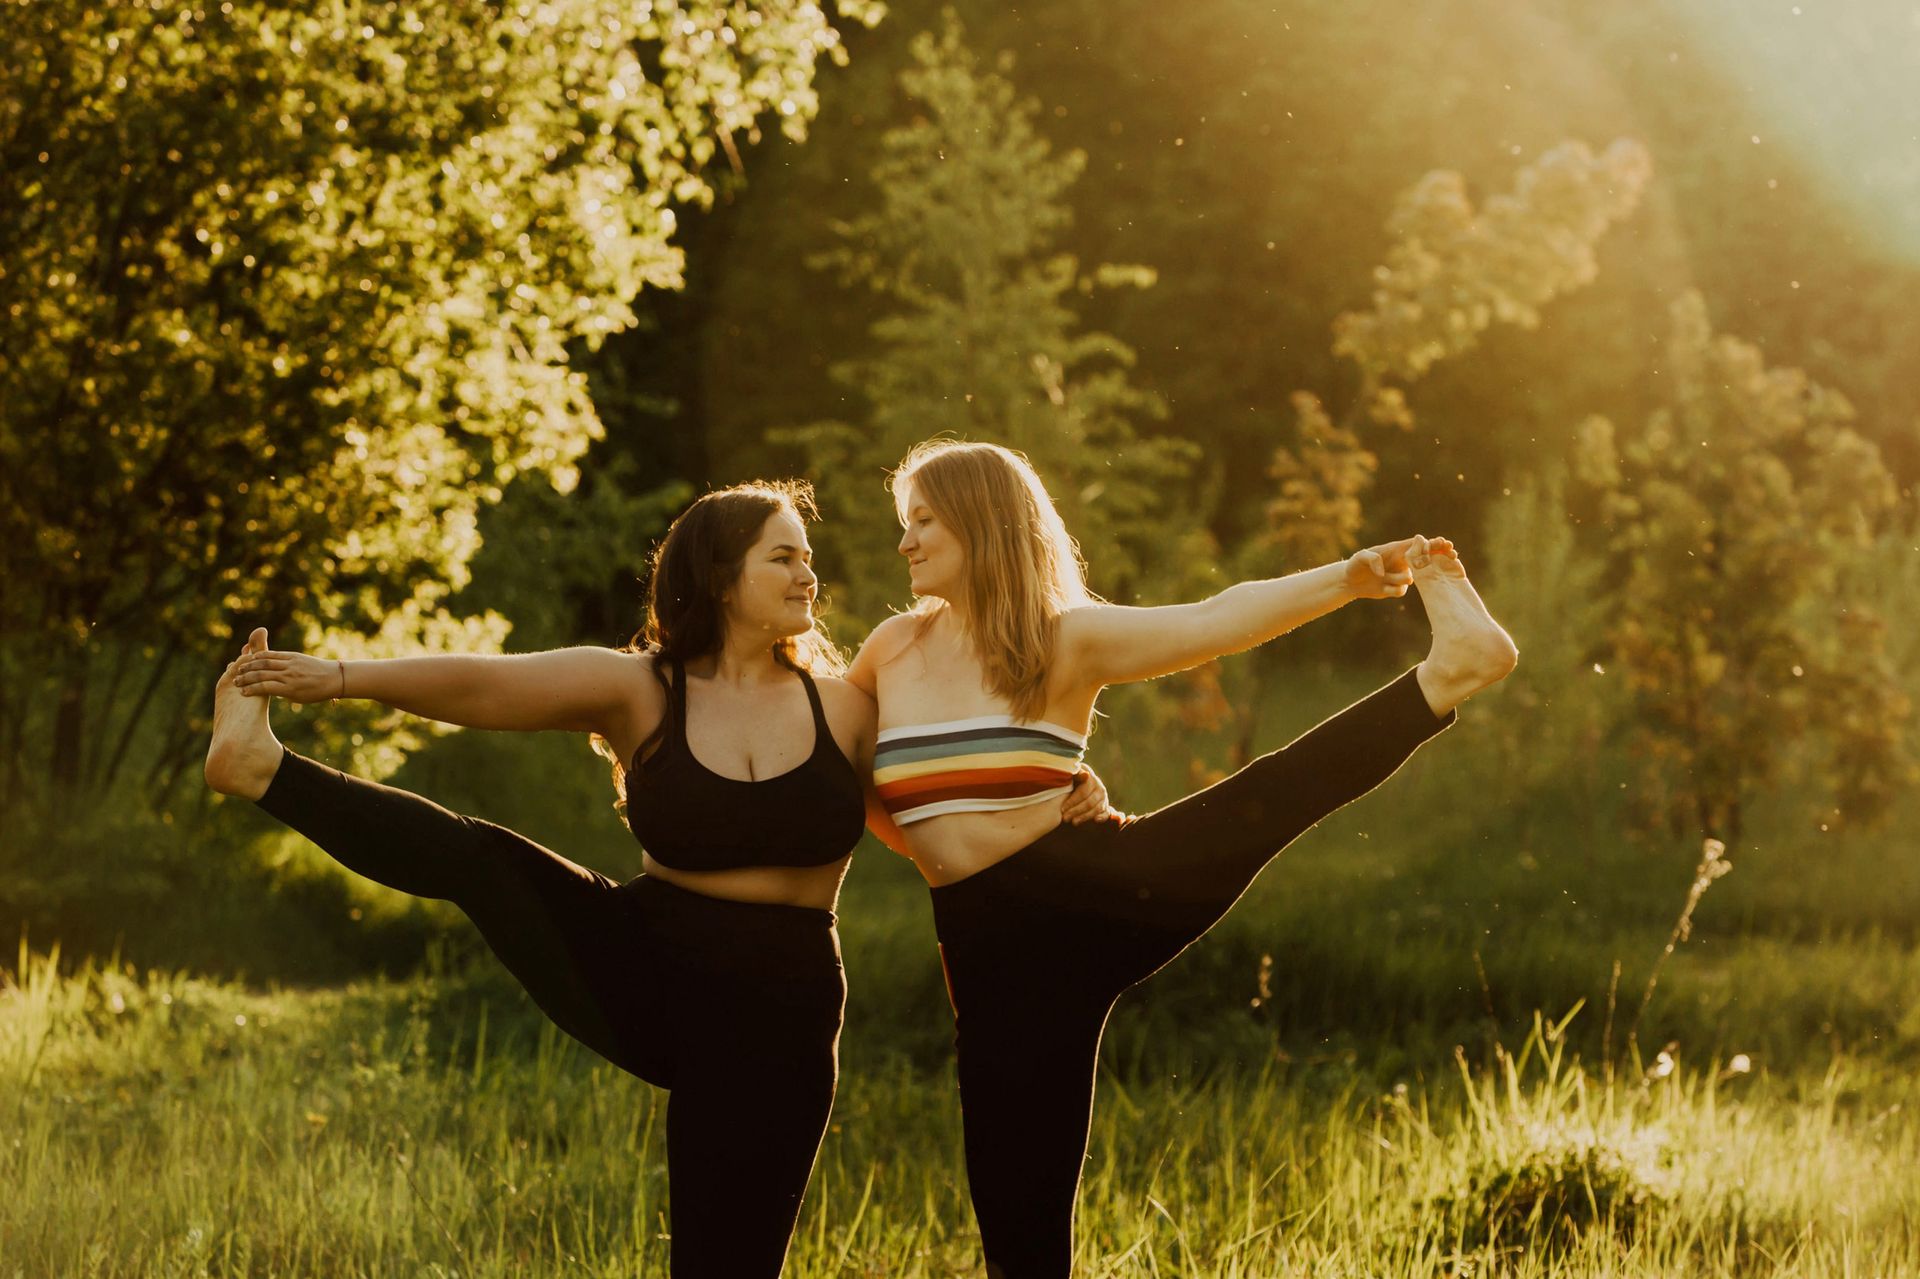 Two women with long hair doing yoga on a sunny day.Two beautiful women with long hair doing yoga in nature on a sunny summer day. Body positive, sports for women and couple, harmony, asana, healthy lifestyle, inspiring look, self-love and wellness.yoga, woman, fitness, asana, body positive, female, girl, body, health, healthy, lifestyle, people, relaxation, young, adult, beautiful, exercise, meditation, nature, pose, sport, fit, outdoor, park, summer, sunset, care, hands, slim, trees, beauty, concentration, balance, energy, relax, activity, athlete, brunette, clothing, pilates, practicing, sun rays, wellness, plus size, weight, friend, couple, together, curvy, long hair